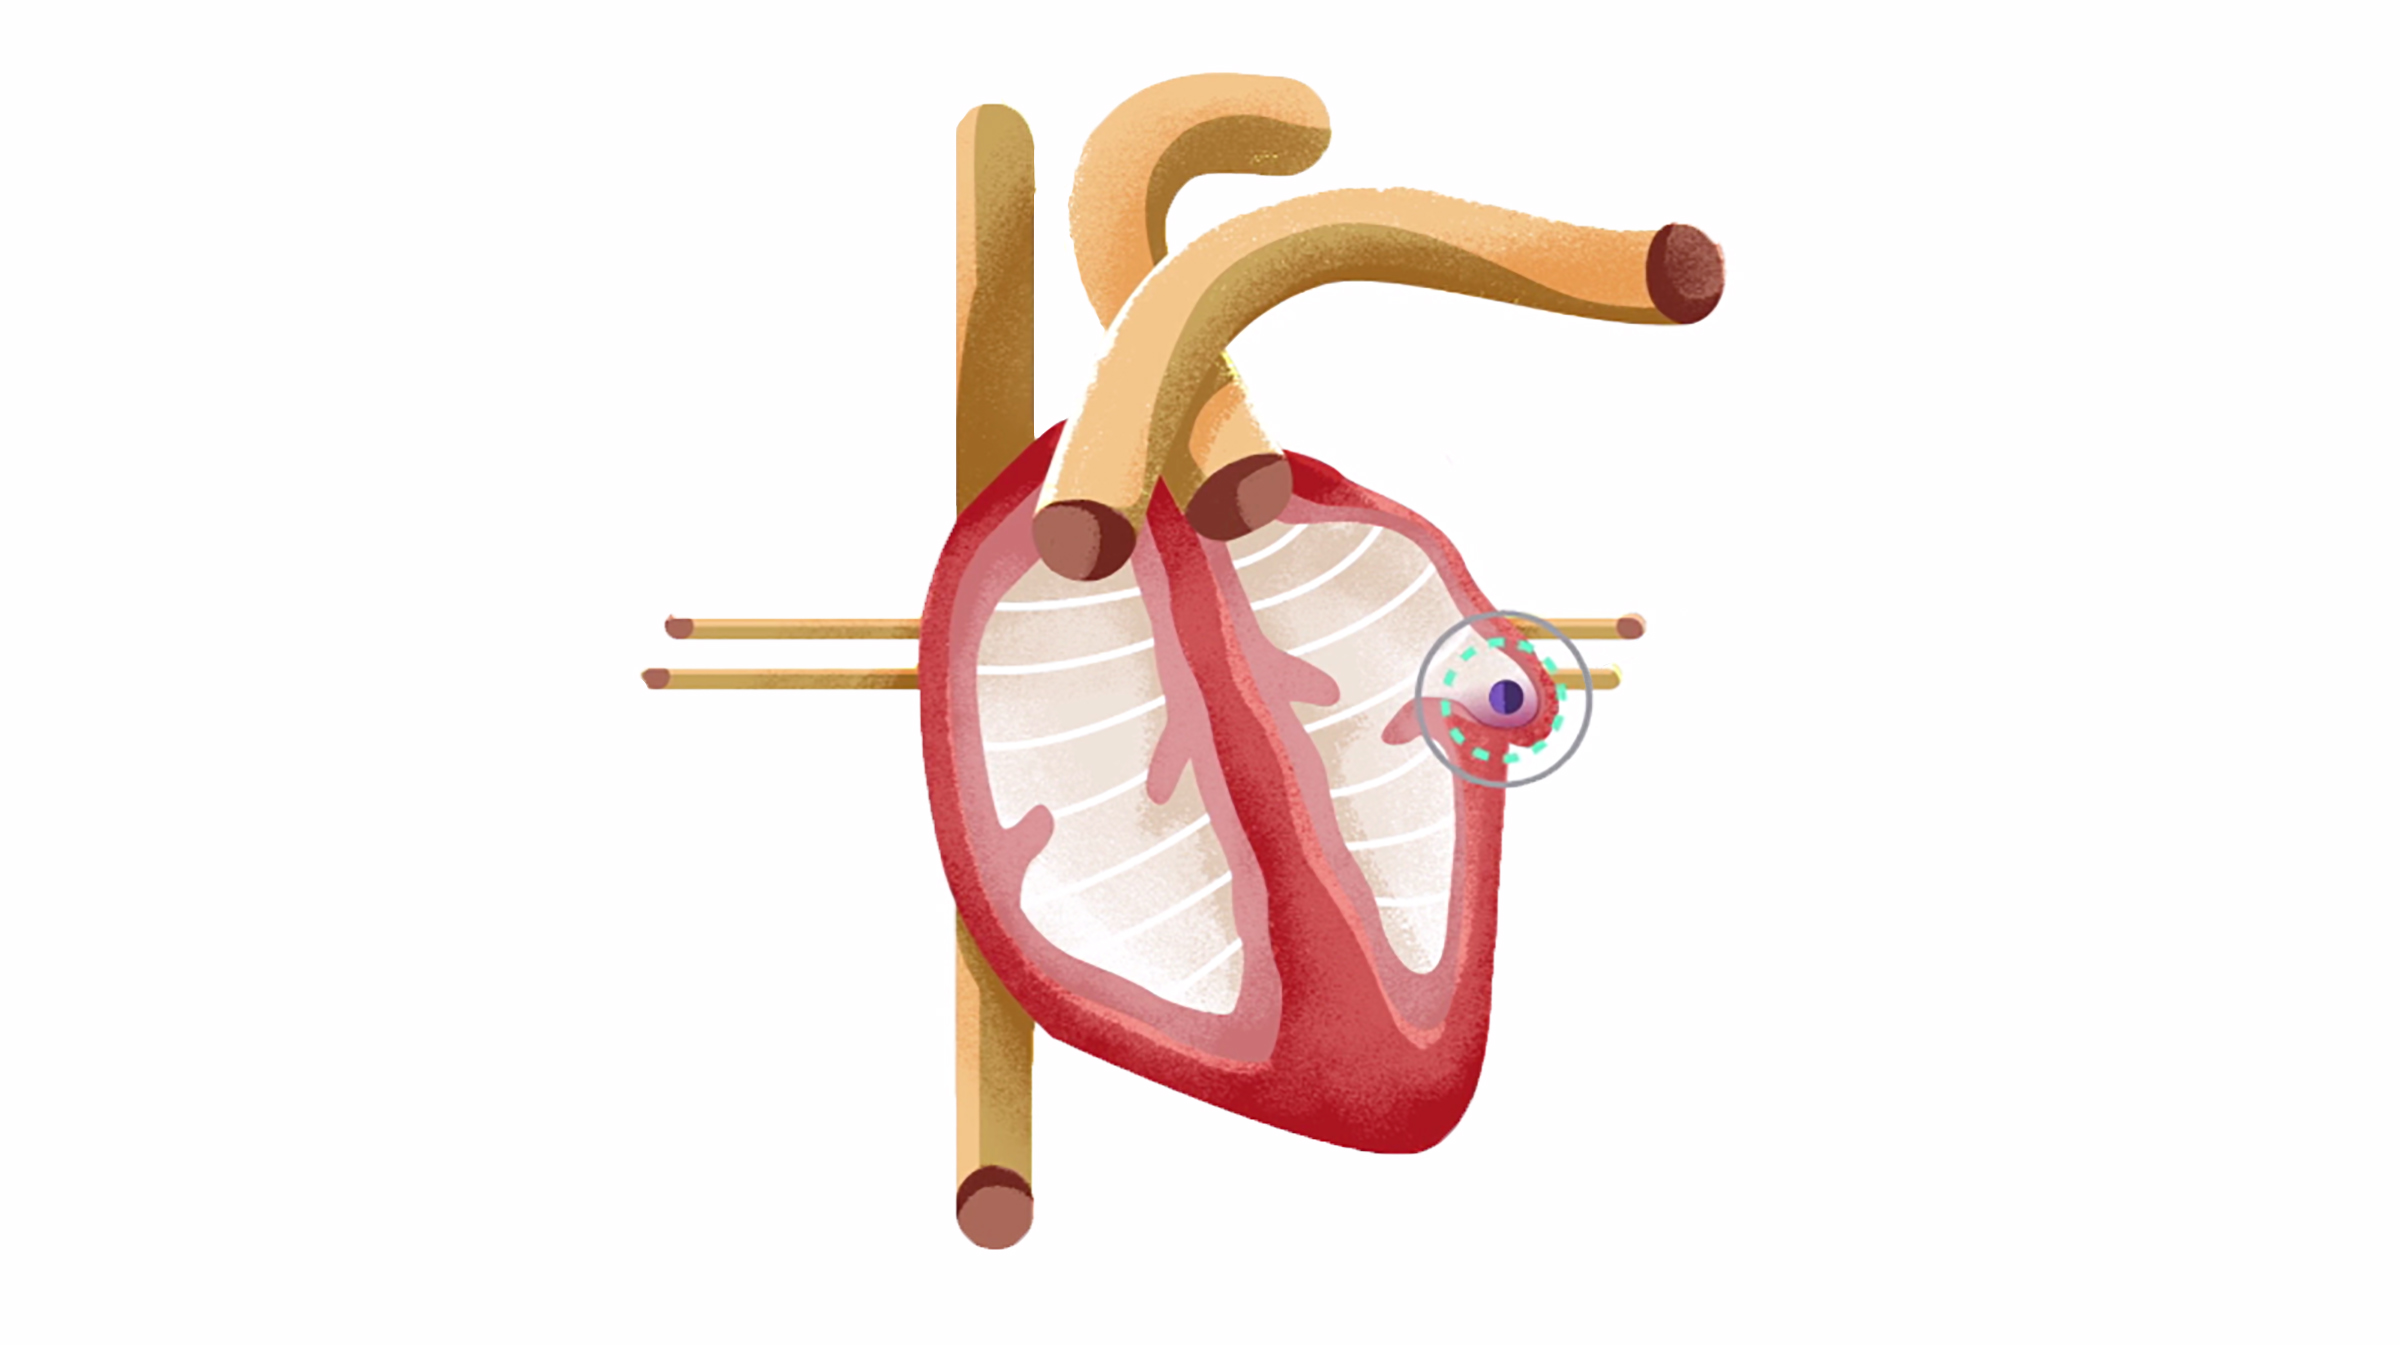 An anatomical illustration of the heart, with a blue dash circle around the location of a left atrial appendage occlusion.